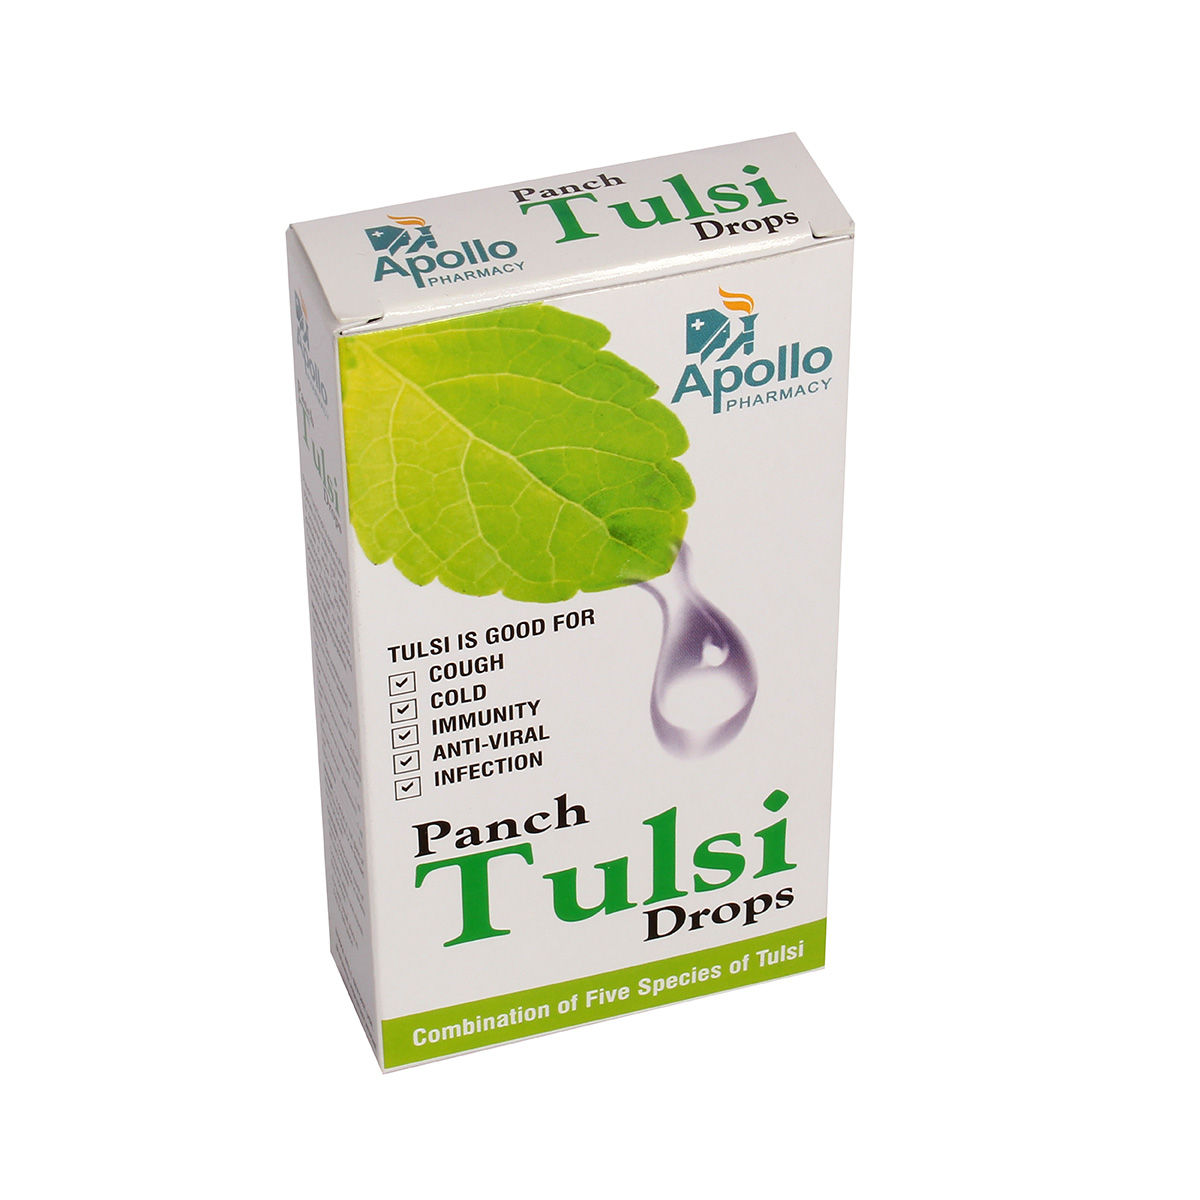 Apollo Pharmacy Panch Tulsi Drops, 20 ml, Pack of 1 